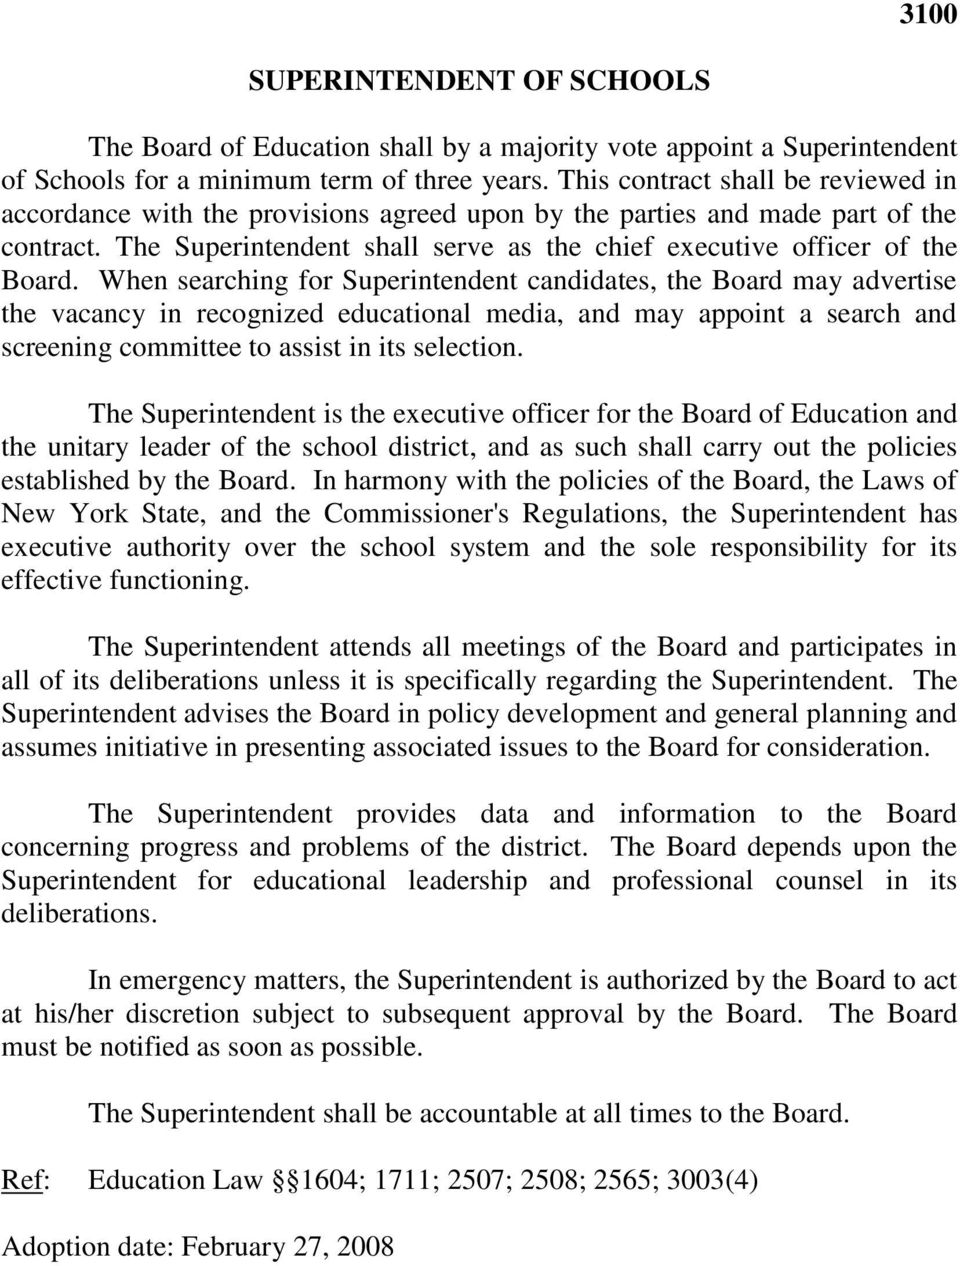 When searching for Superintendent candidates, the Board may advertise the vacancy in recognized educational media, and may appoint a search and screening committee to assist in its selection.